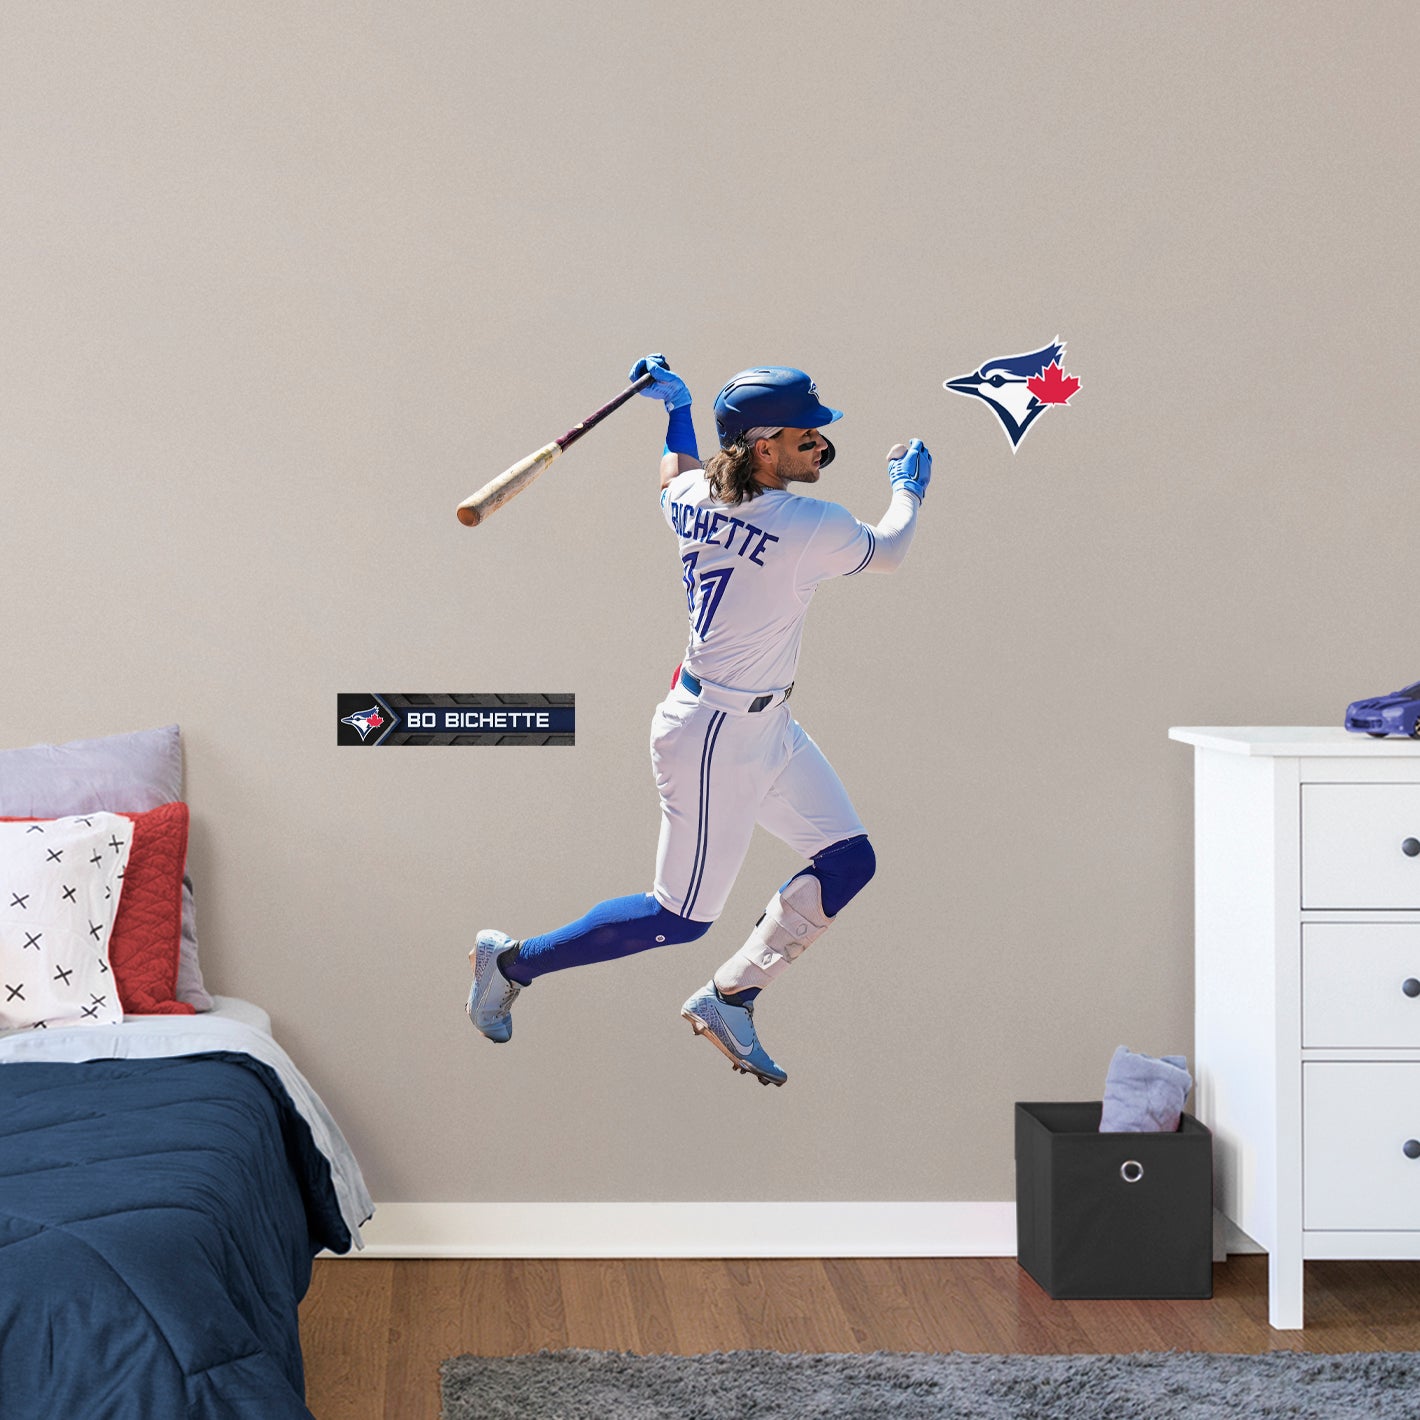 Toronto Blue Jays: Bo Bichette         - Officially Licensed MLB Removable     Adhesive Decal